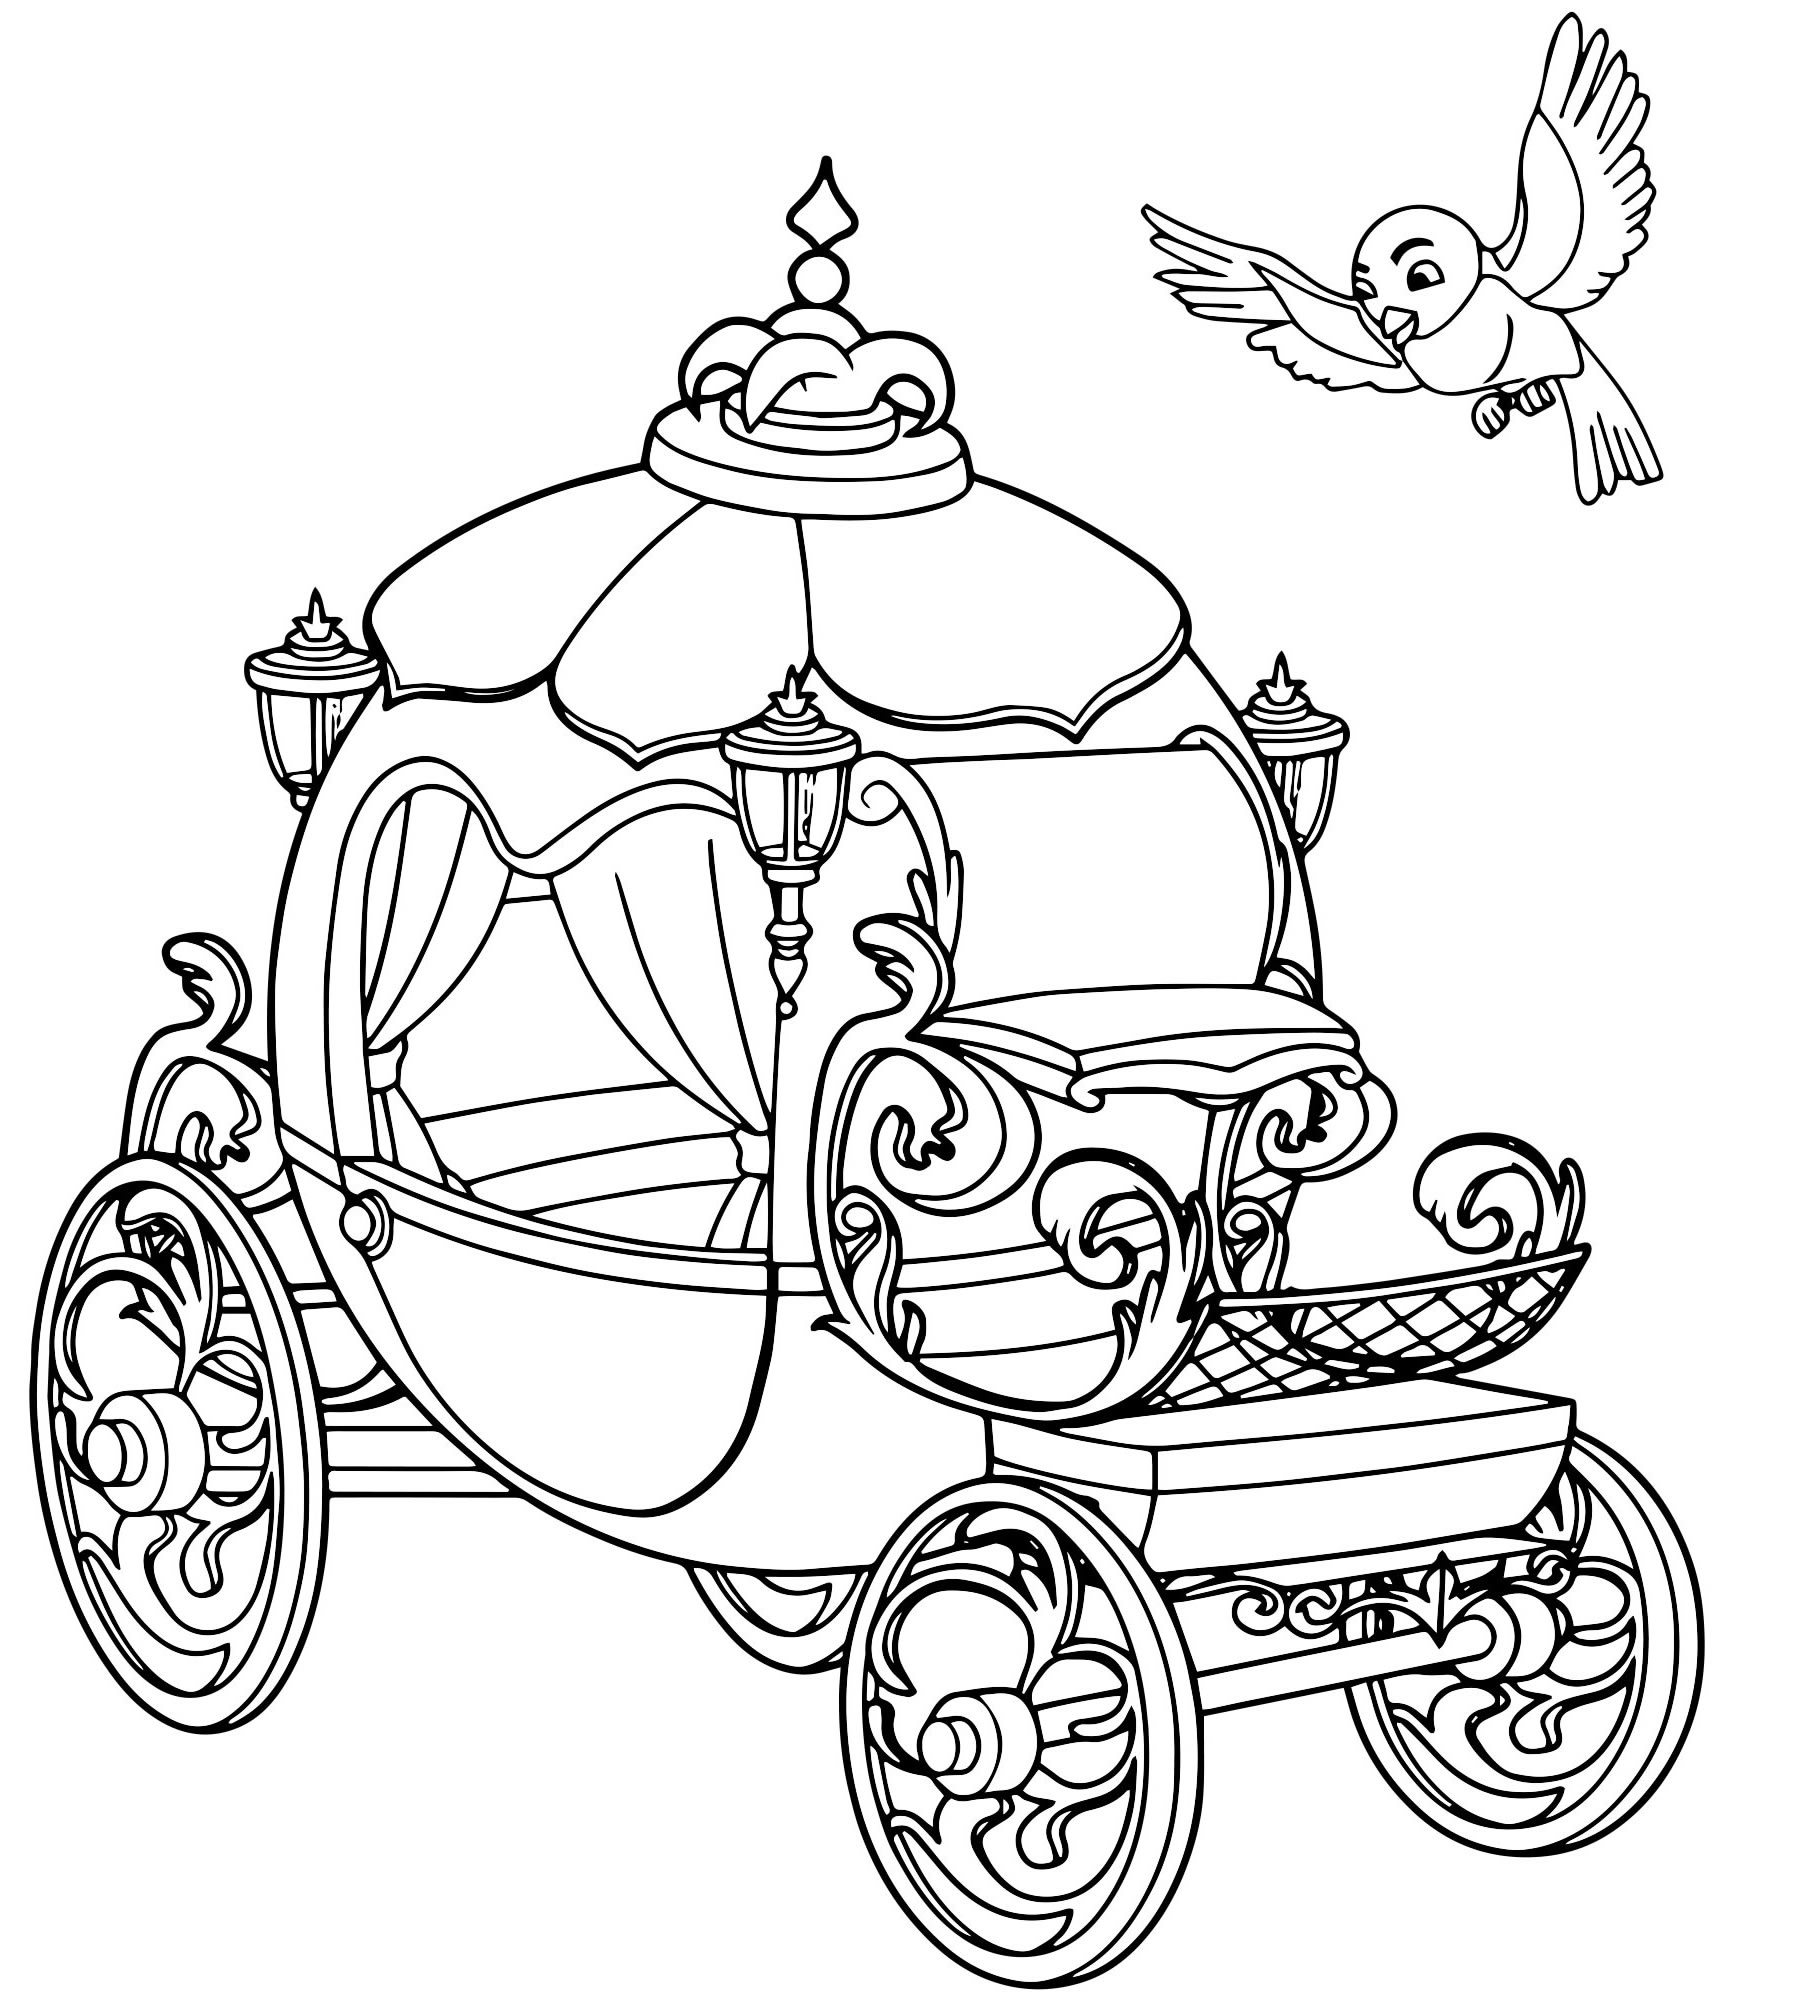 Coloring page whimsical princess in carriage